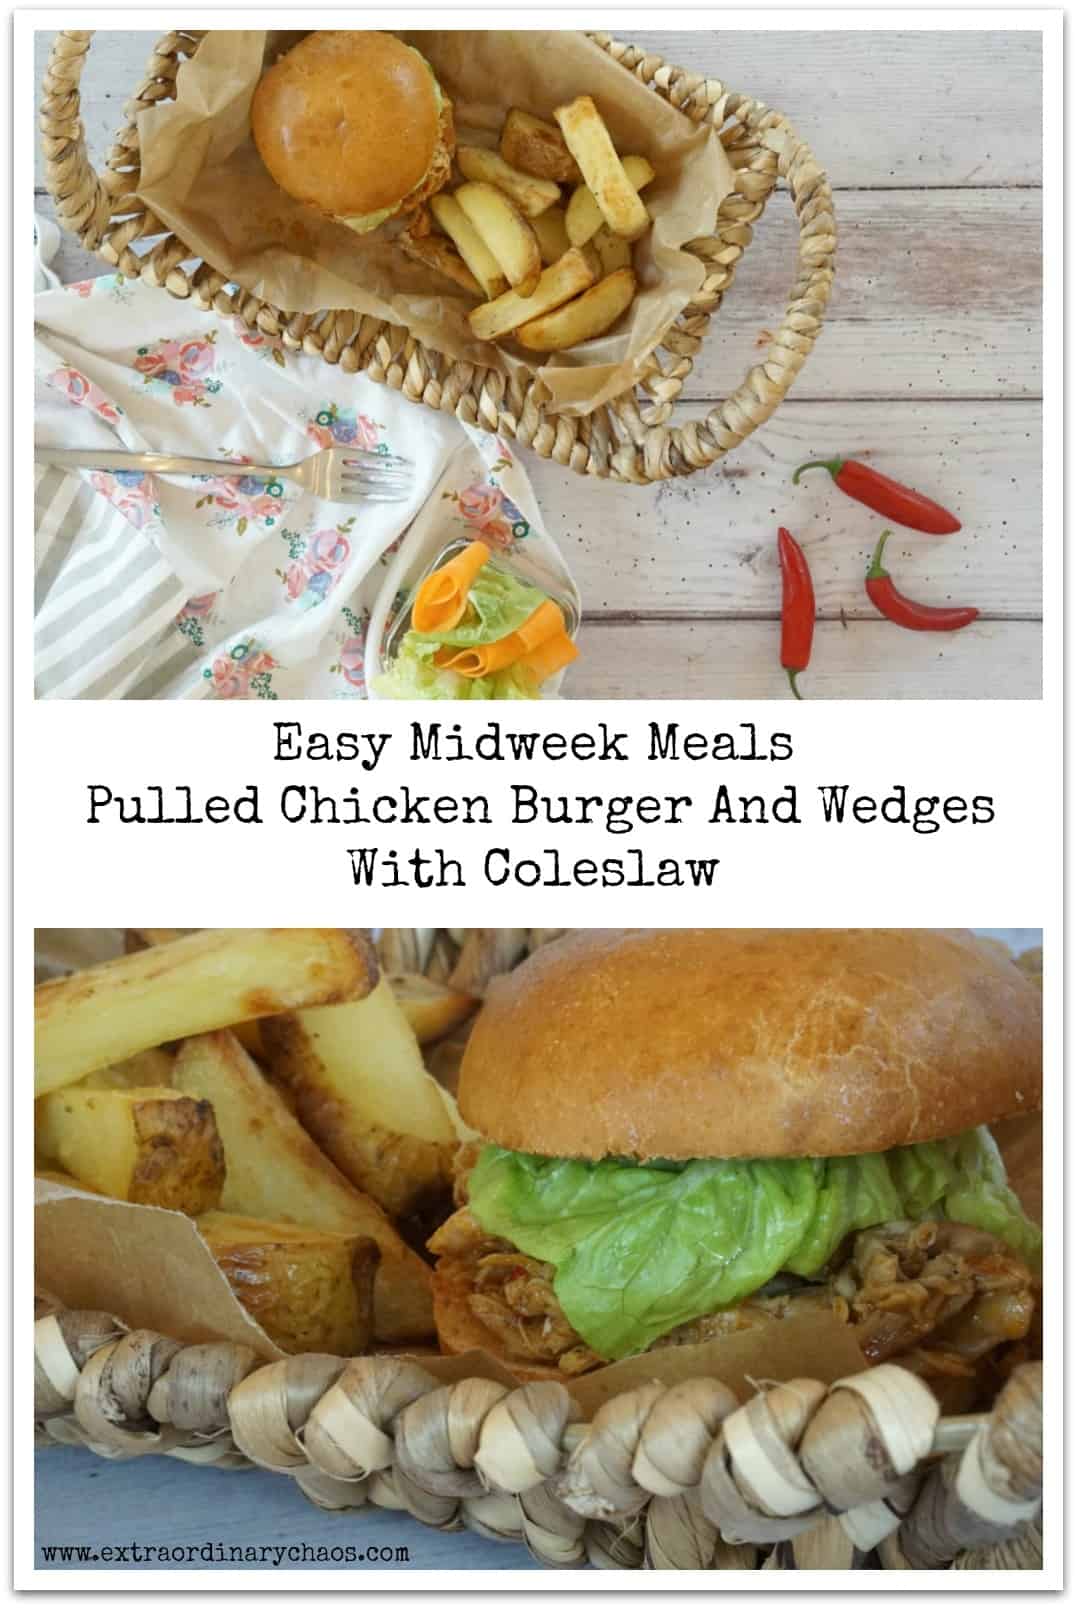 Easy Midweek Meals for busy families, BBQ Pulled Chicken Burger And Wedges With Coleslaw